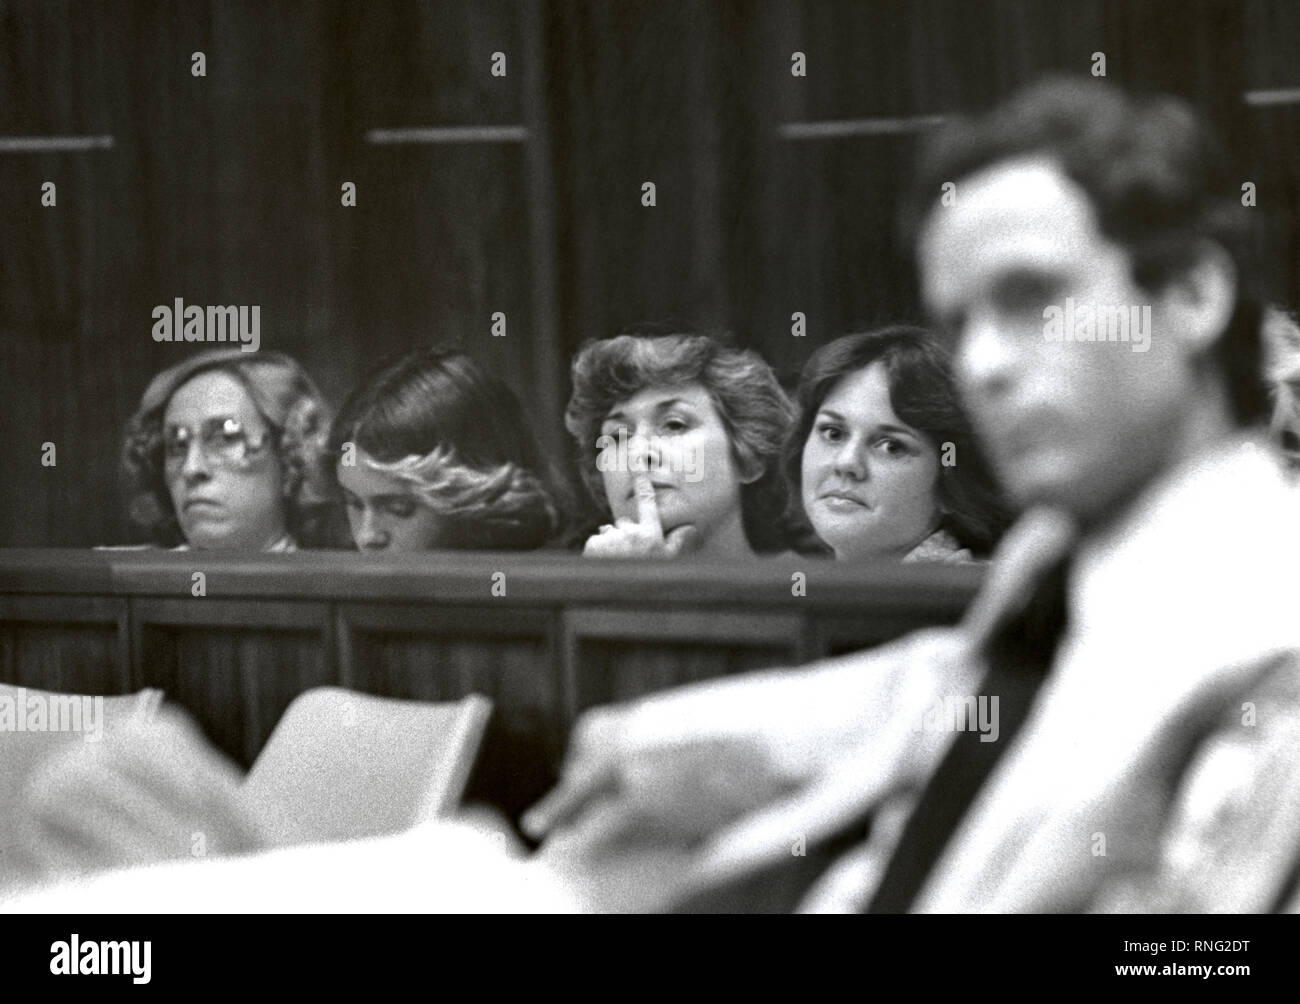 Ted Bundy Murder Trial - Miami - Scores of young women arrive at the courthouse early each morning trying to be admitted to the Ted Bundy Trial and if luck would have it - the front row of the courtroom behind Bundy. Some accounts referred to some of the women as Bundy's Groupies. Theodore Robert Bundy was an American serial killer, kidnapper, rapist, burglar, and necrophile who assaulted and murdered numerous young women and girls during the 1970s and possibly earlier. After more than a decade of denials, he confessed to 30 homicides that he committed in seven states between 1974 and 1978. Stock Photo